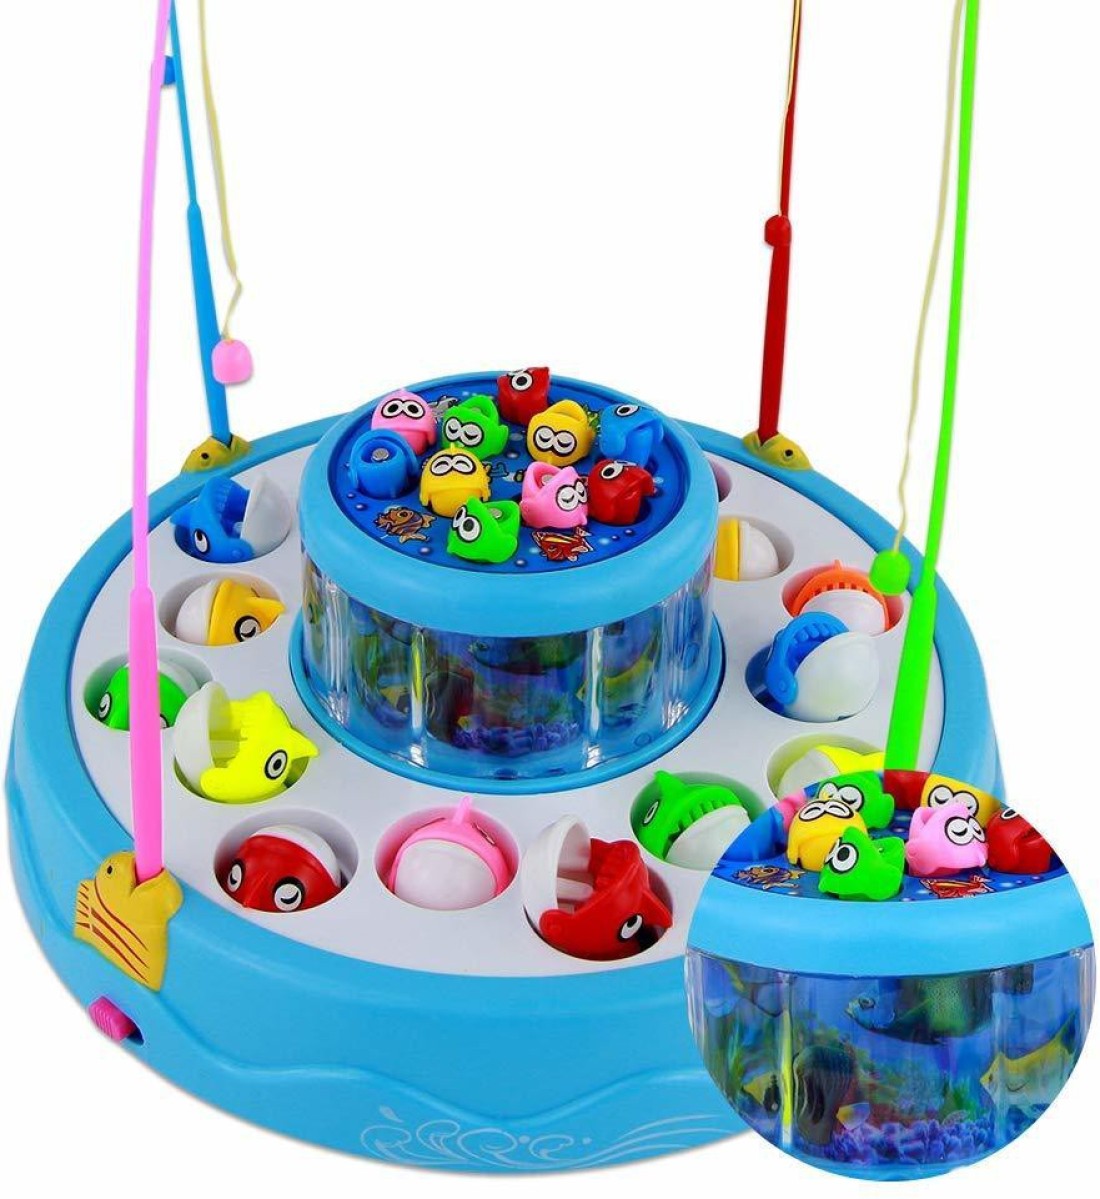 Braintastic Musical Rotating Tyre Fishing Fish Catching Game Big Round Pond  Catch a Fish Catching Game for Kids Boys Girls Multi Colour (1 pieces)